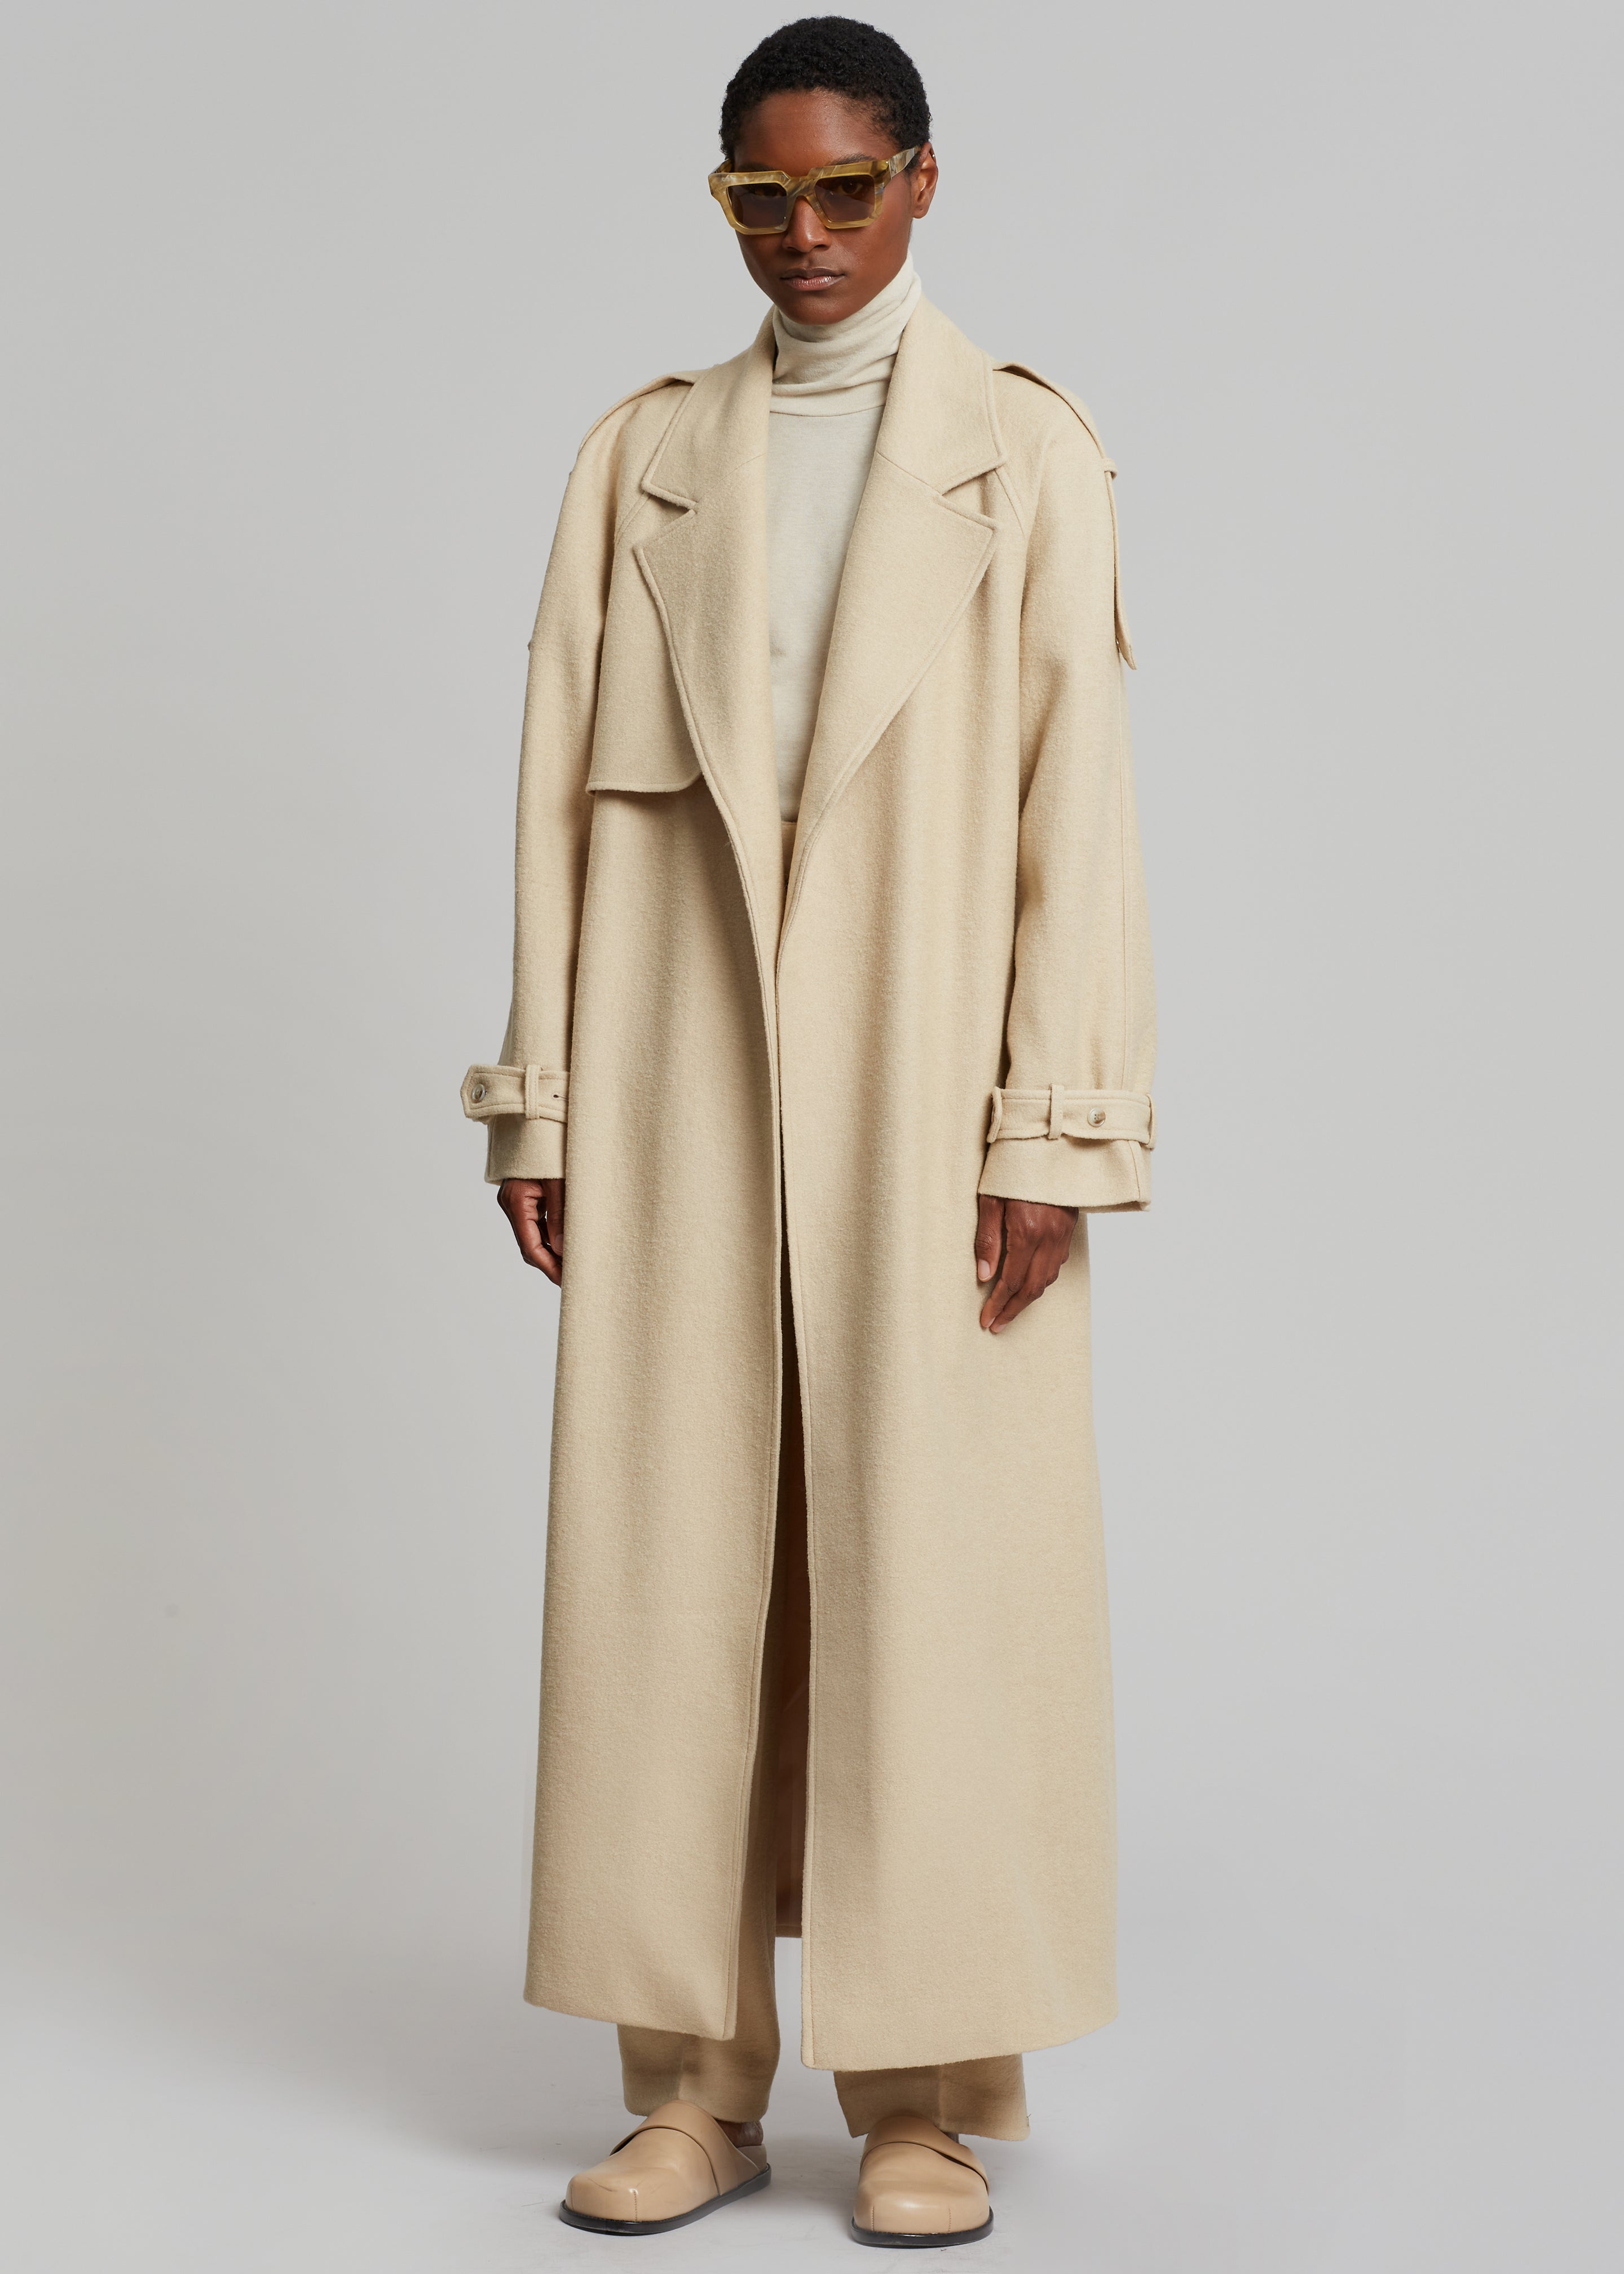 Suzanne Boiled Wool Trench Coat - Beige